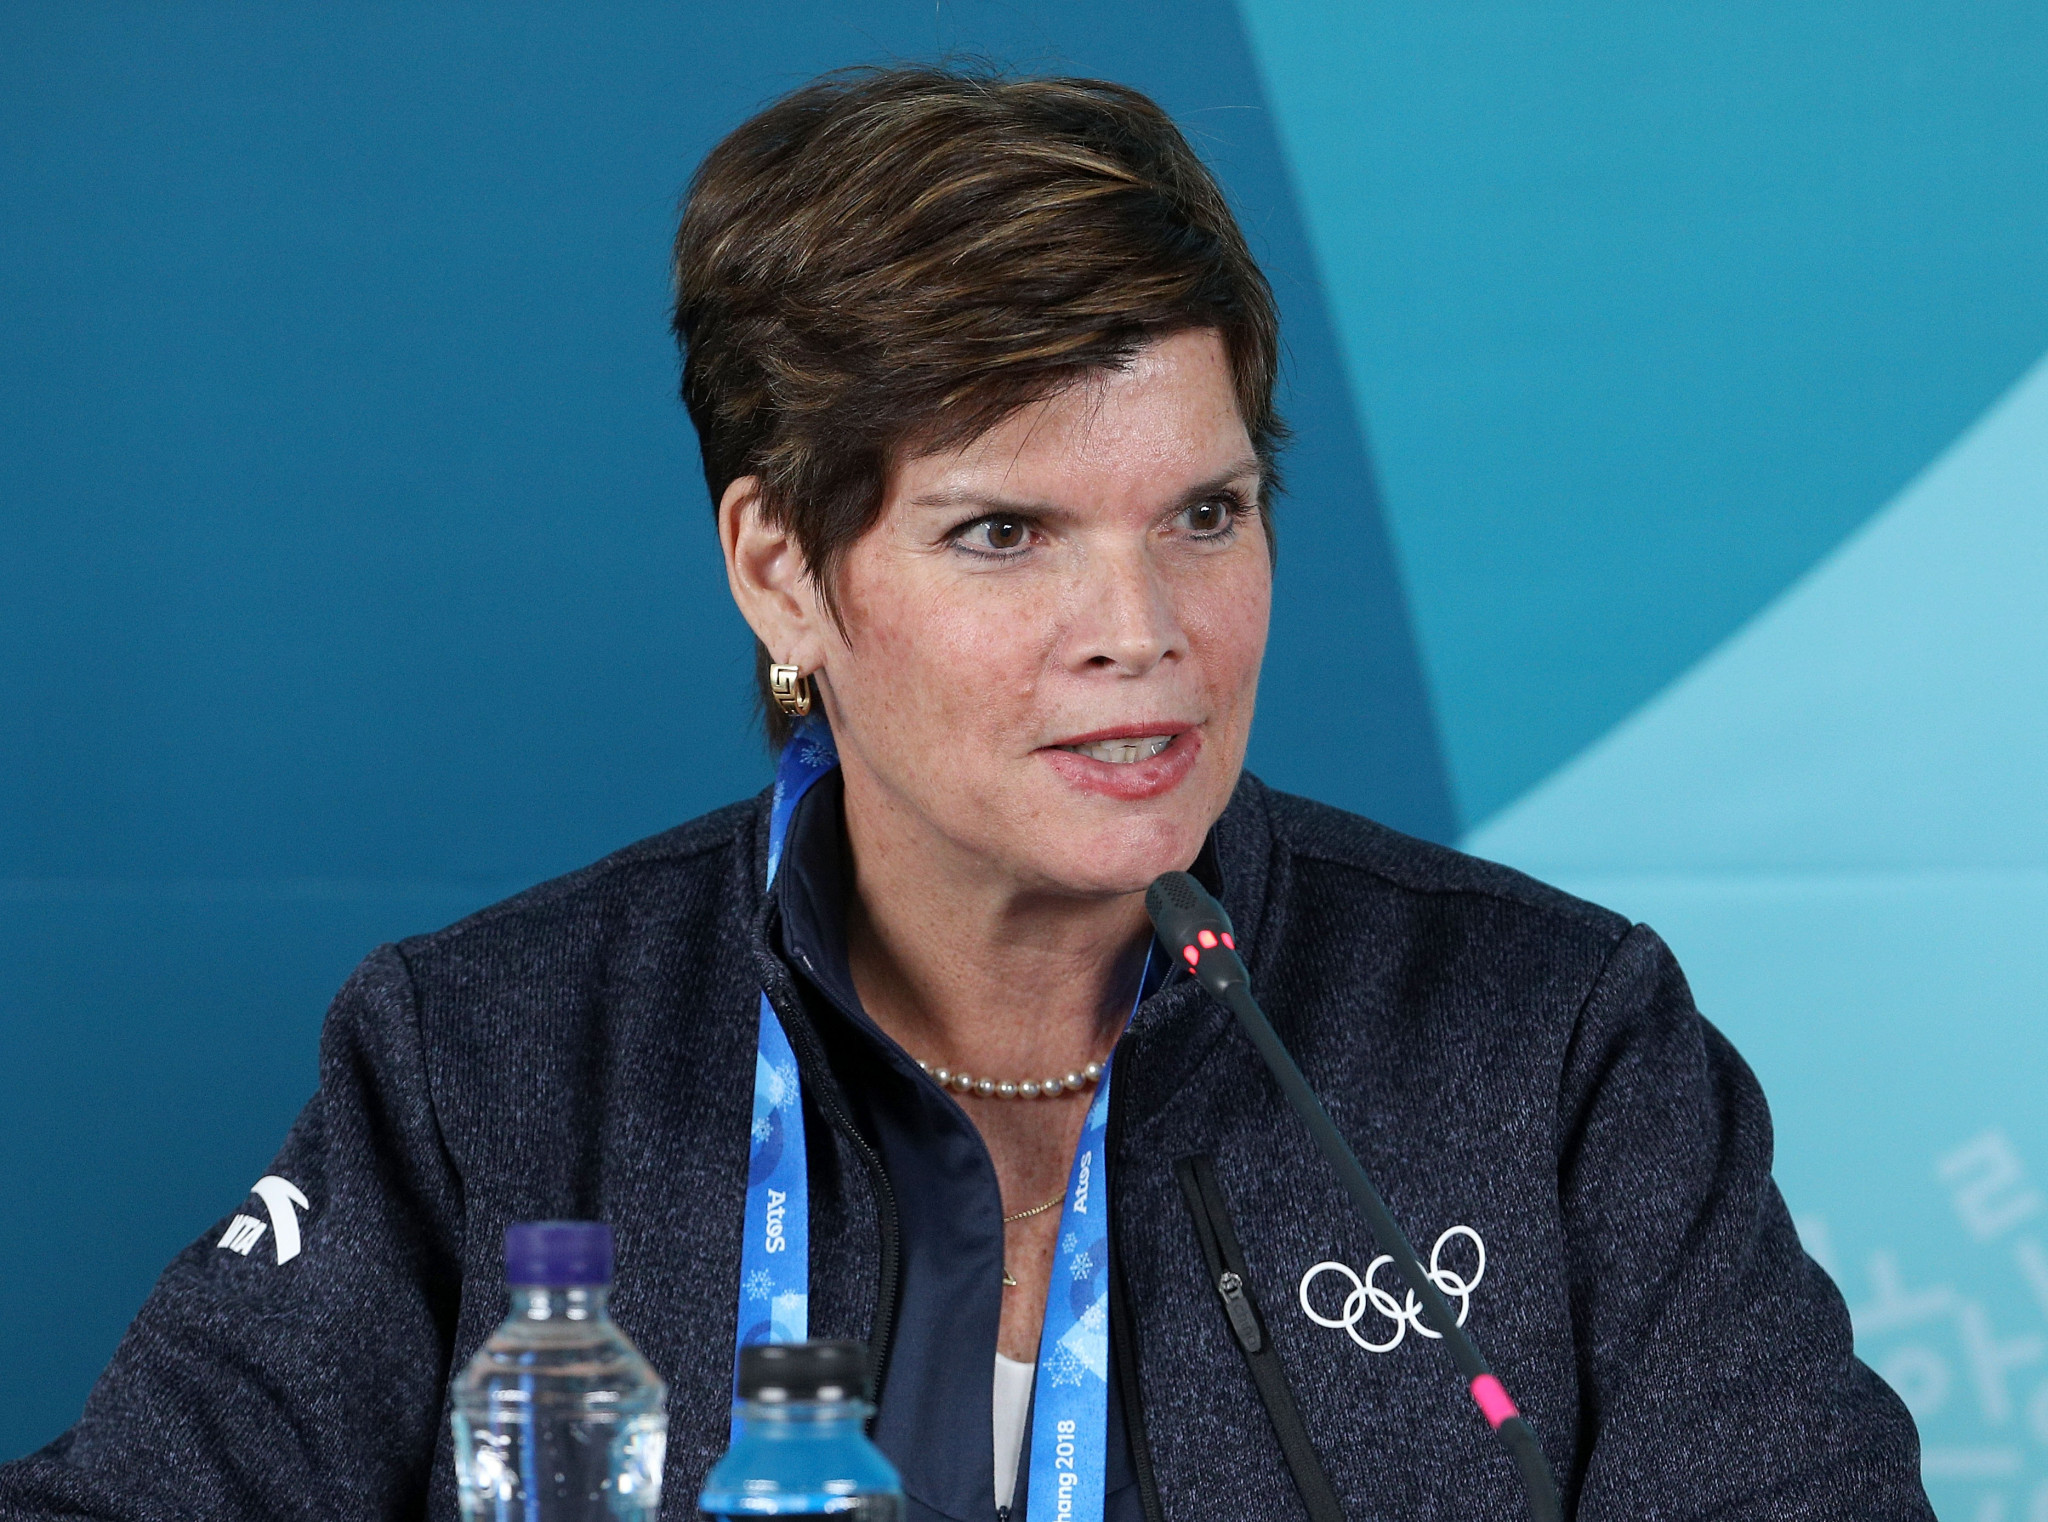 Nicole Hoevertsz chaired the panel tasked with assessing Russian eligibility ©Getty Images